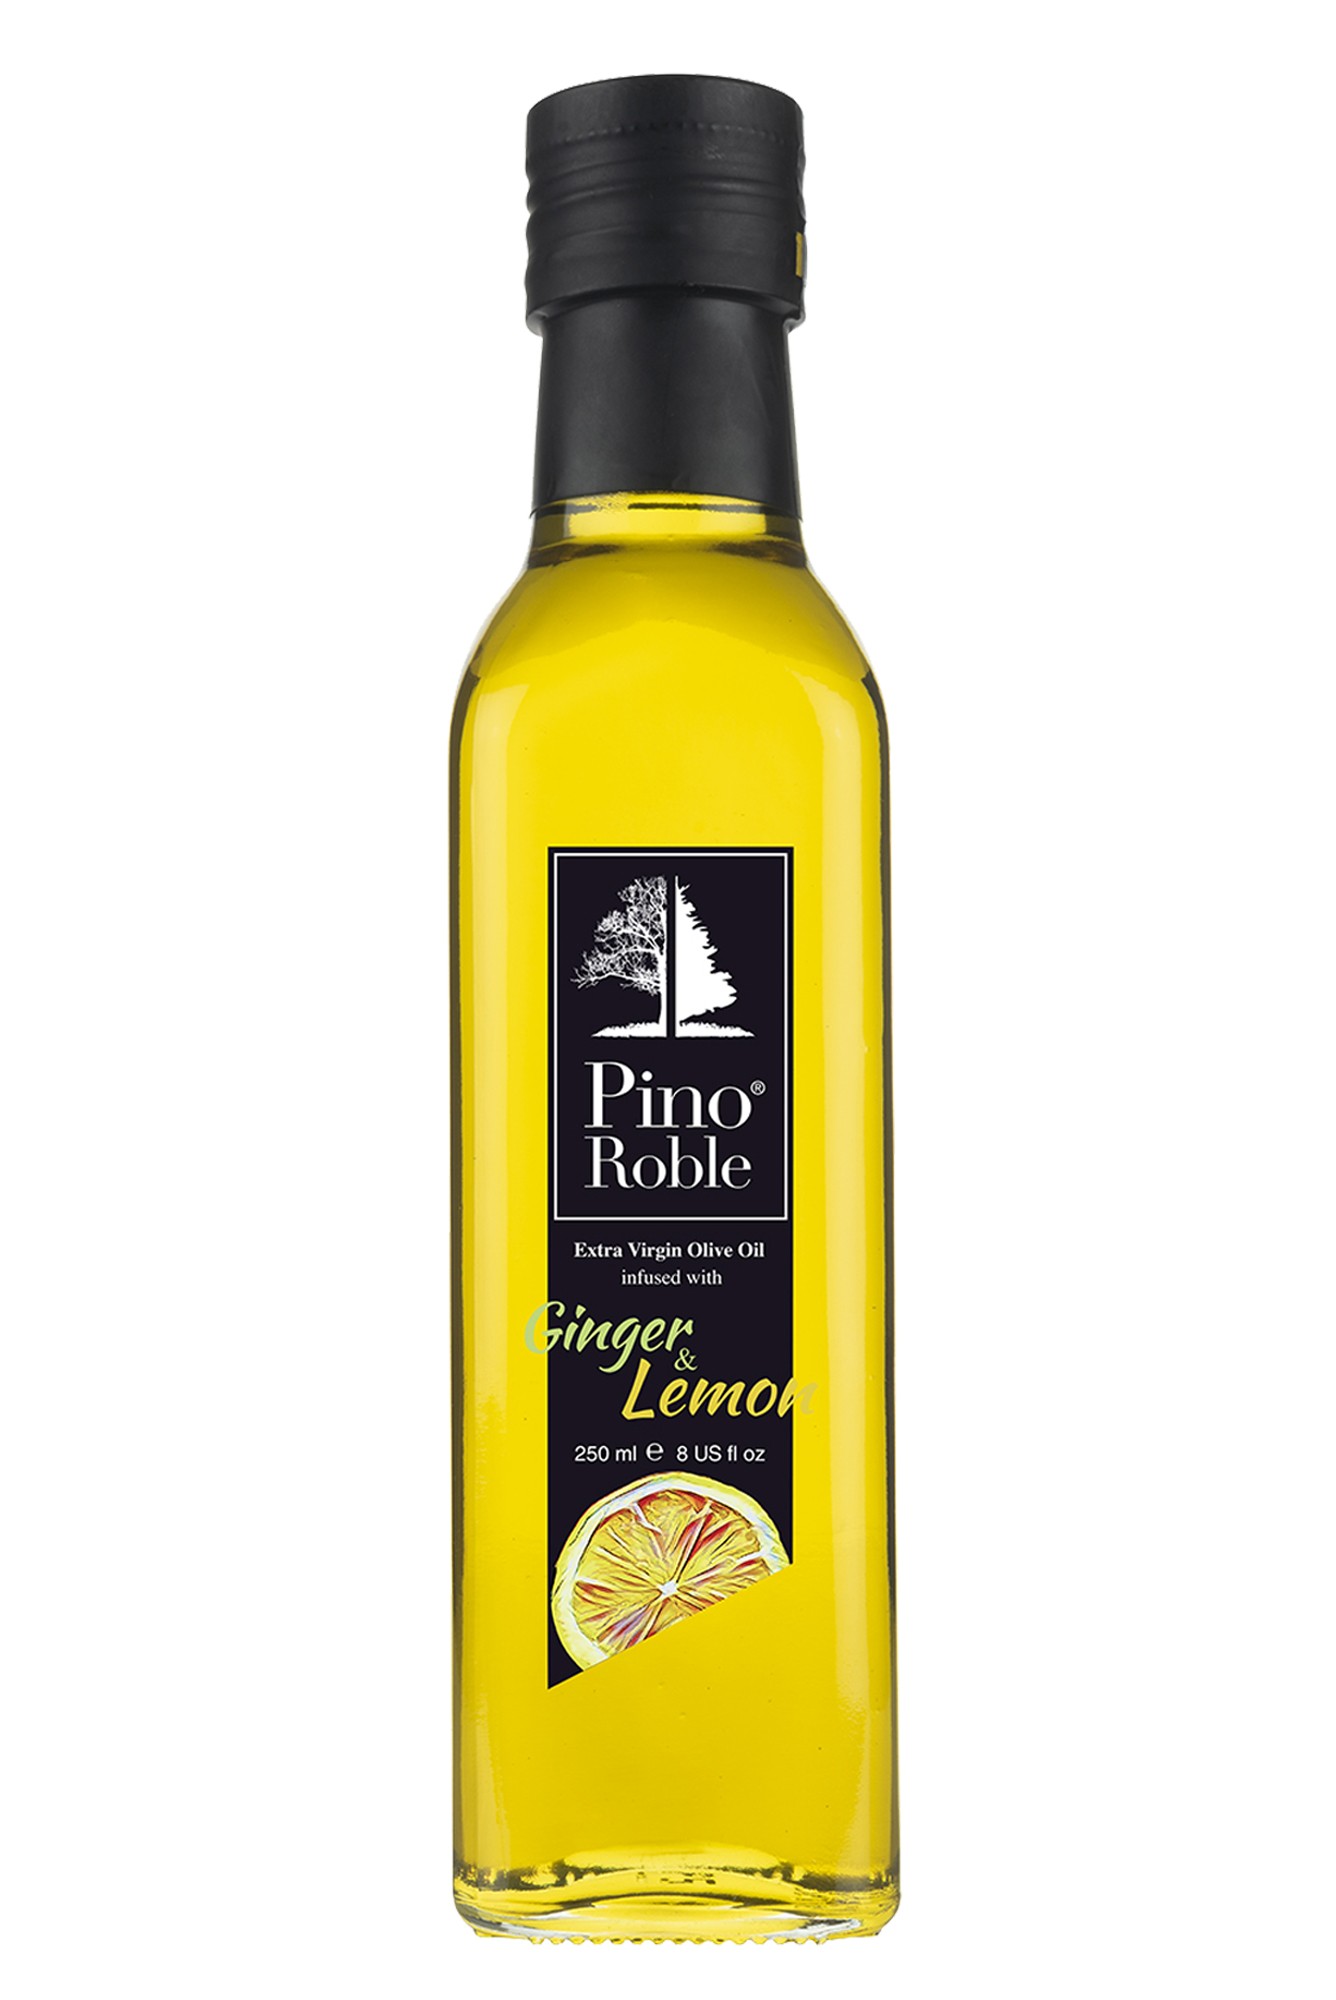 PinoRoble Extra Virgin Olive Oil Infused with Ginger & Lemon 8 fl Oz